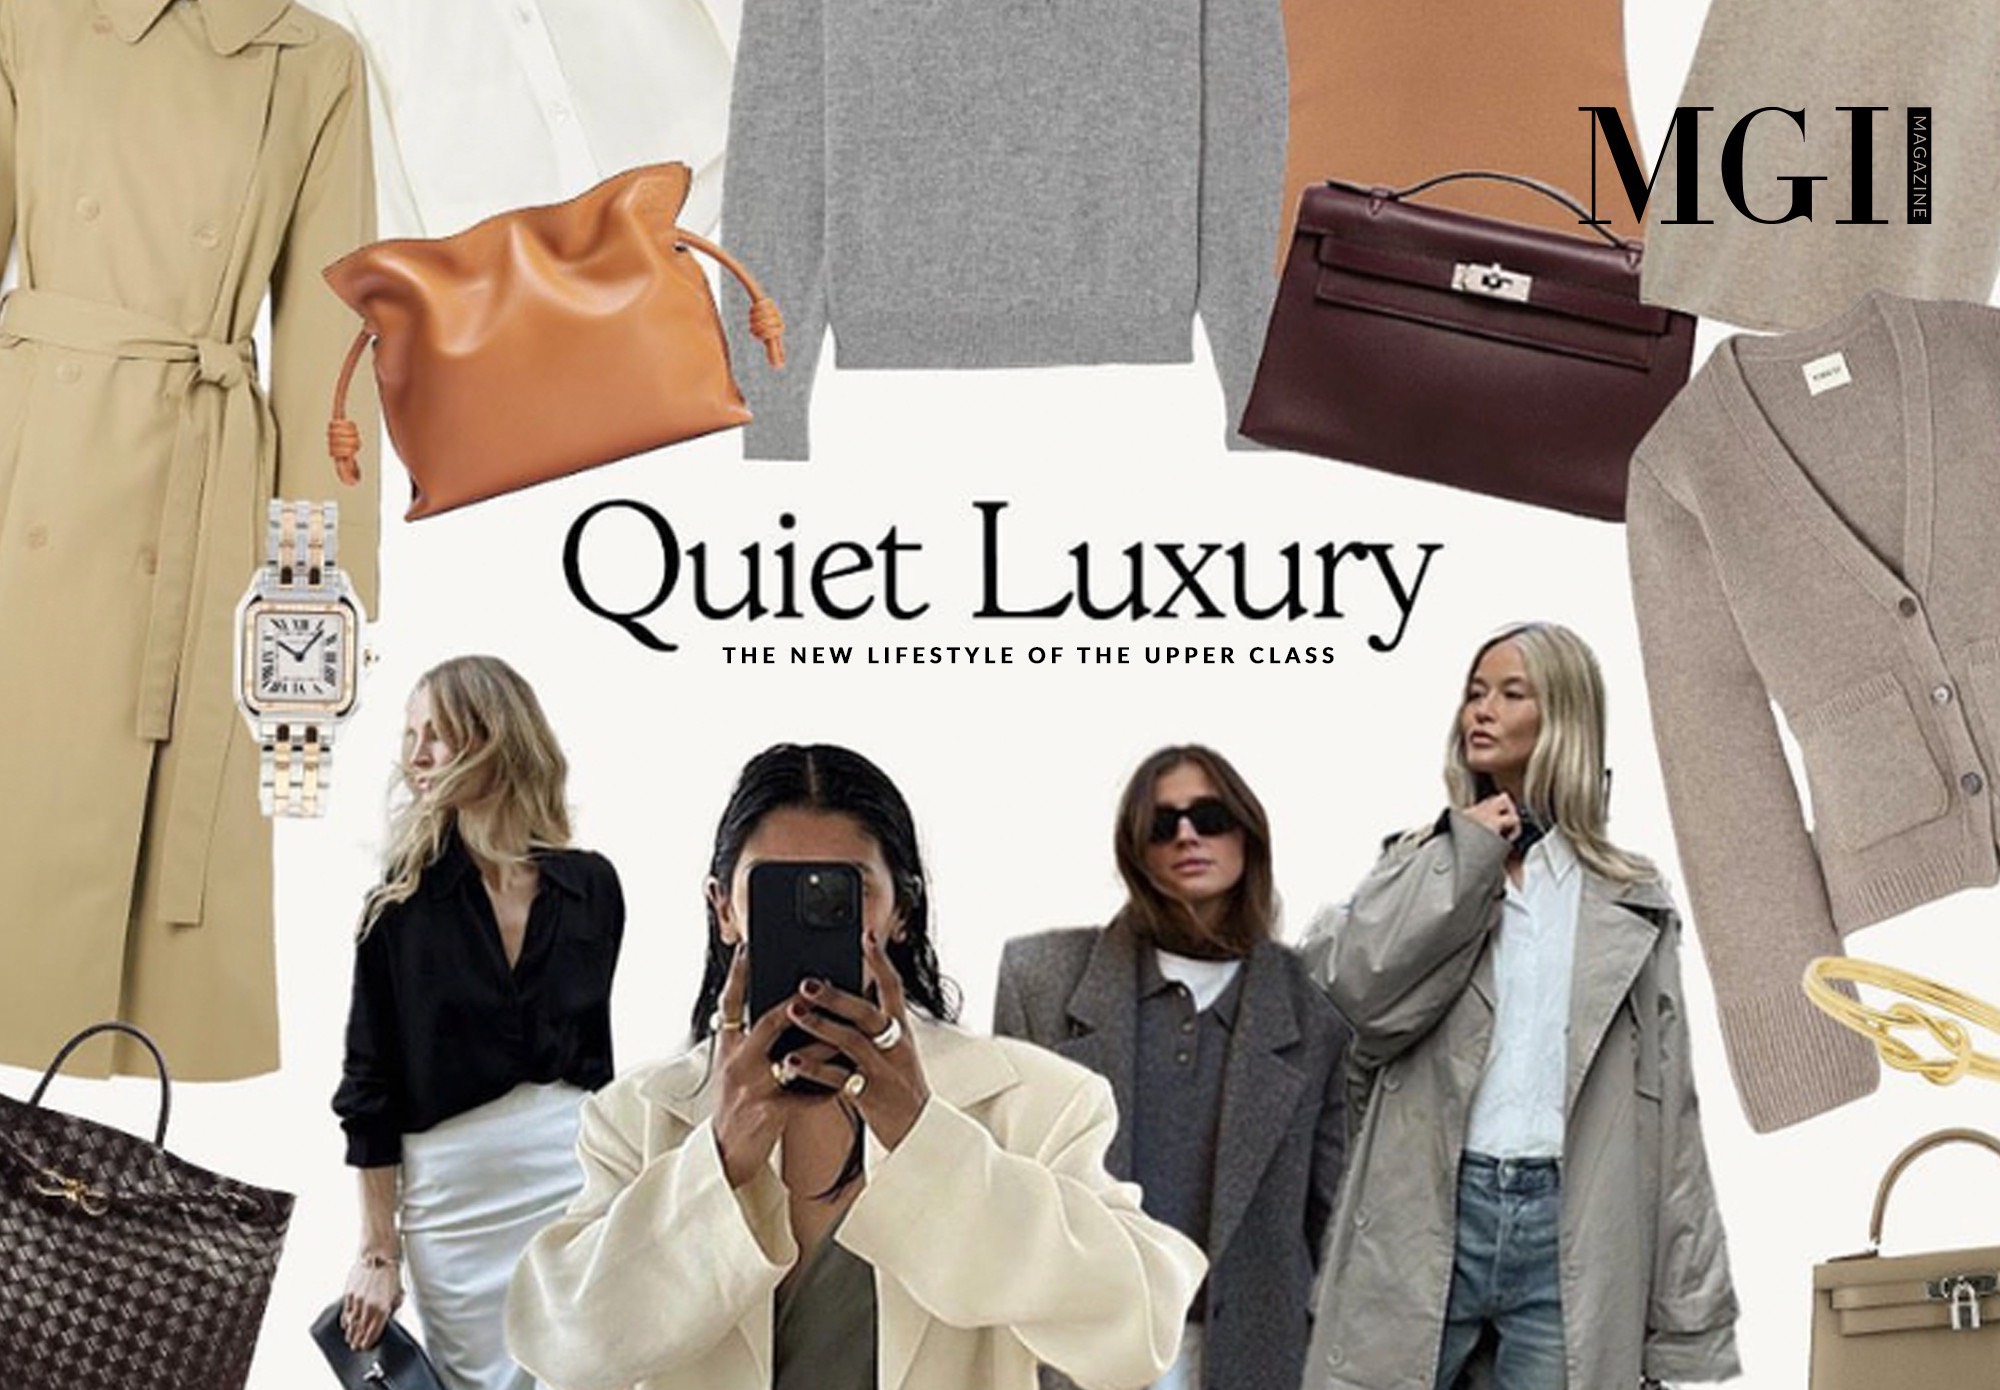 Quiet Luxury: The New Lifestyle of the Upper Class